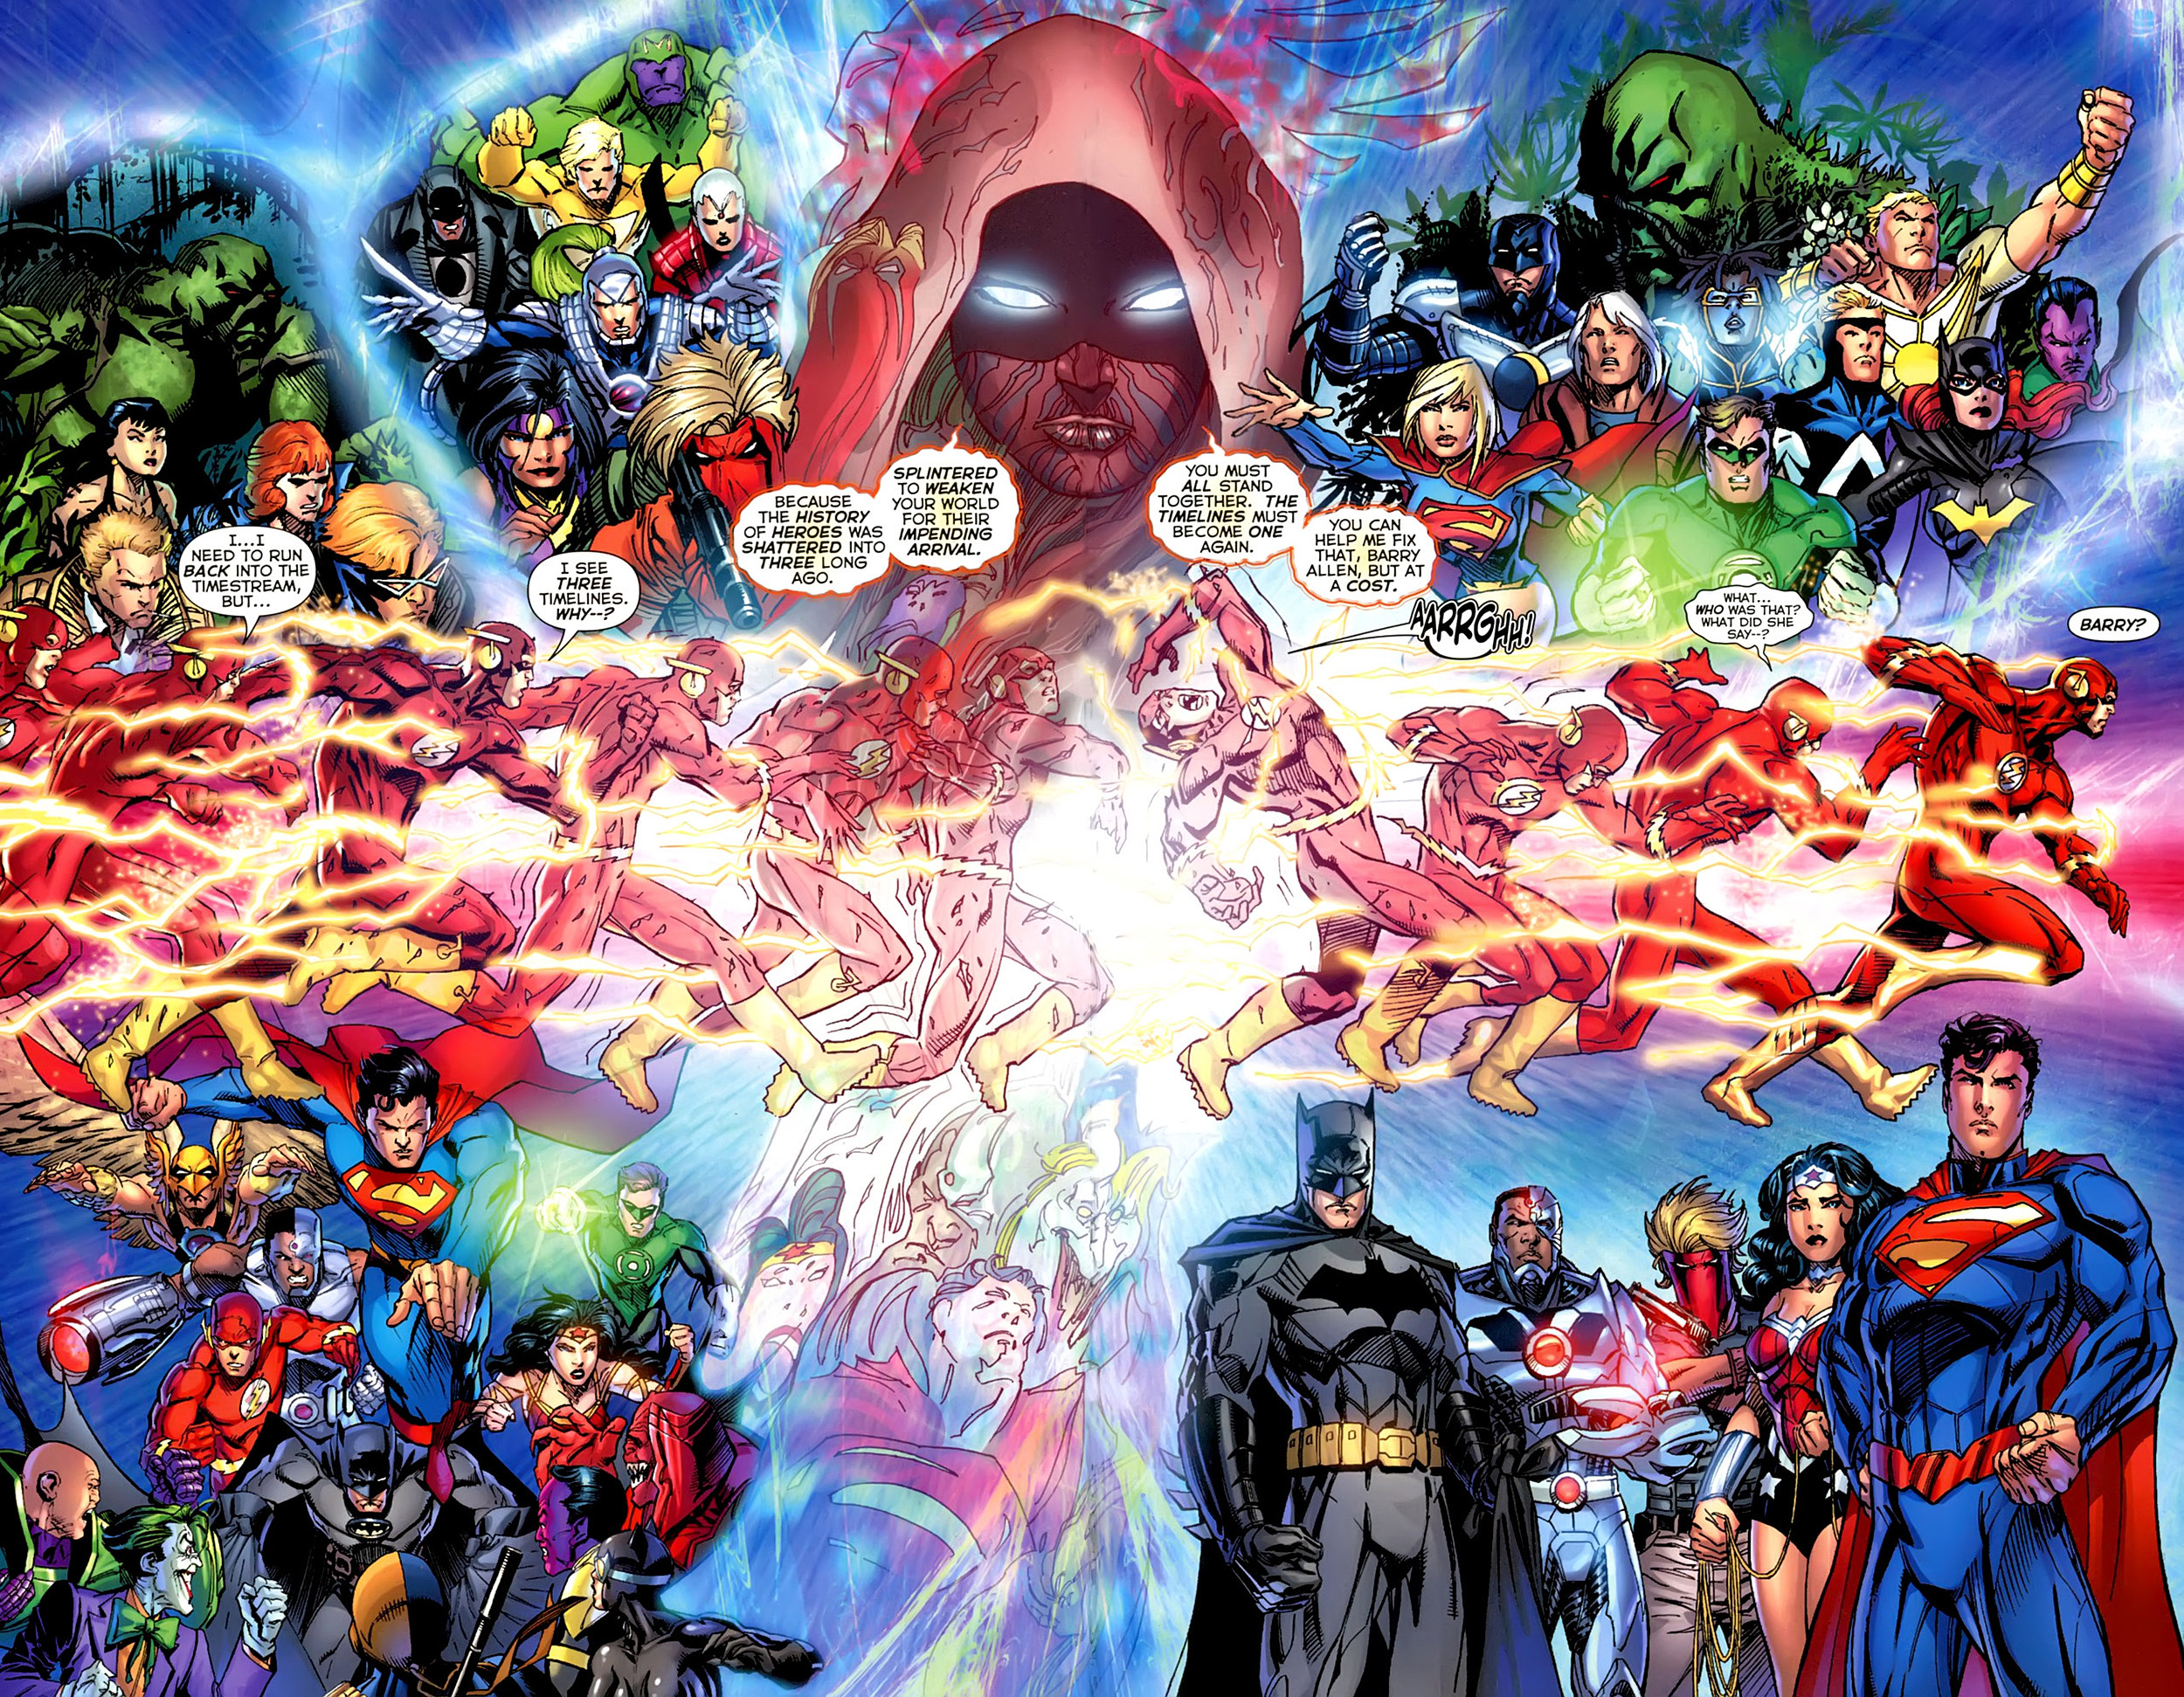 The New Era: How DC Gambled A Universe On The New 52